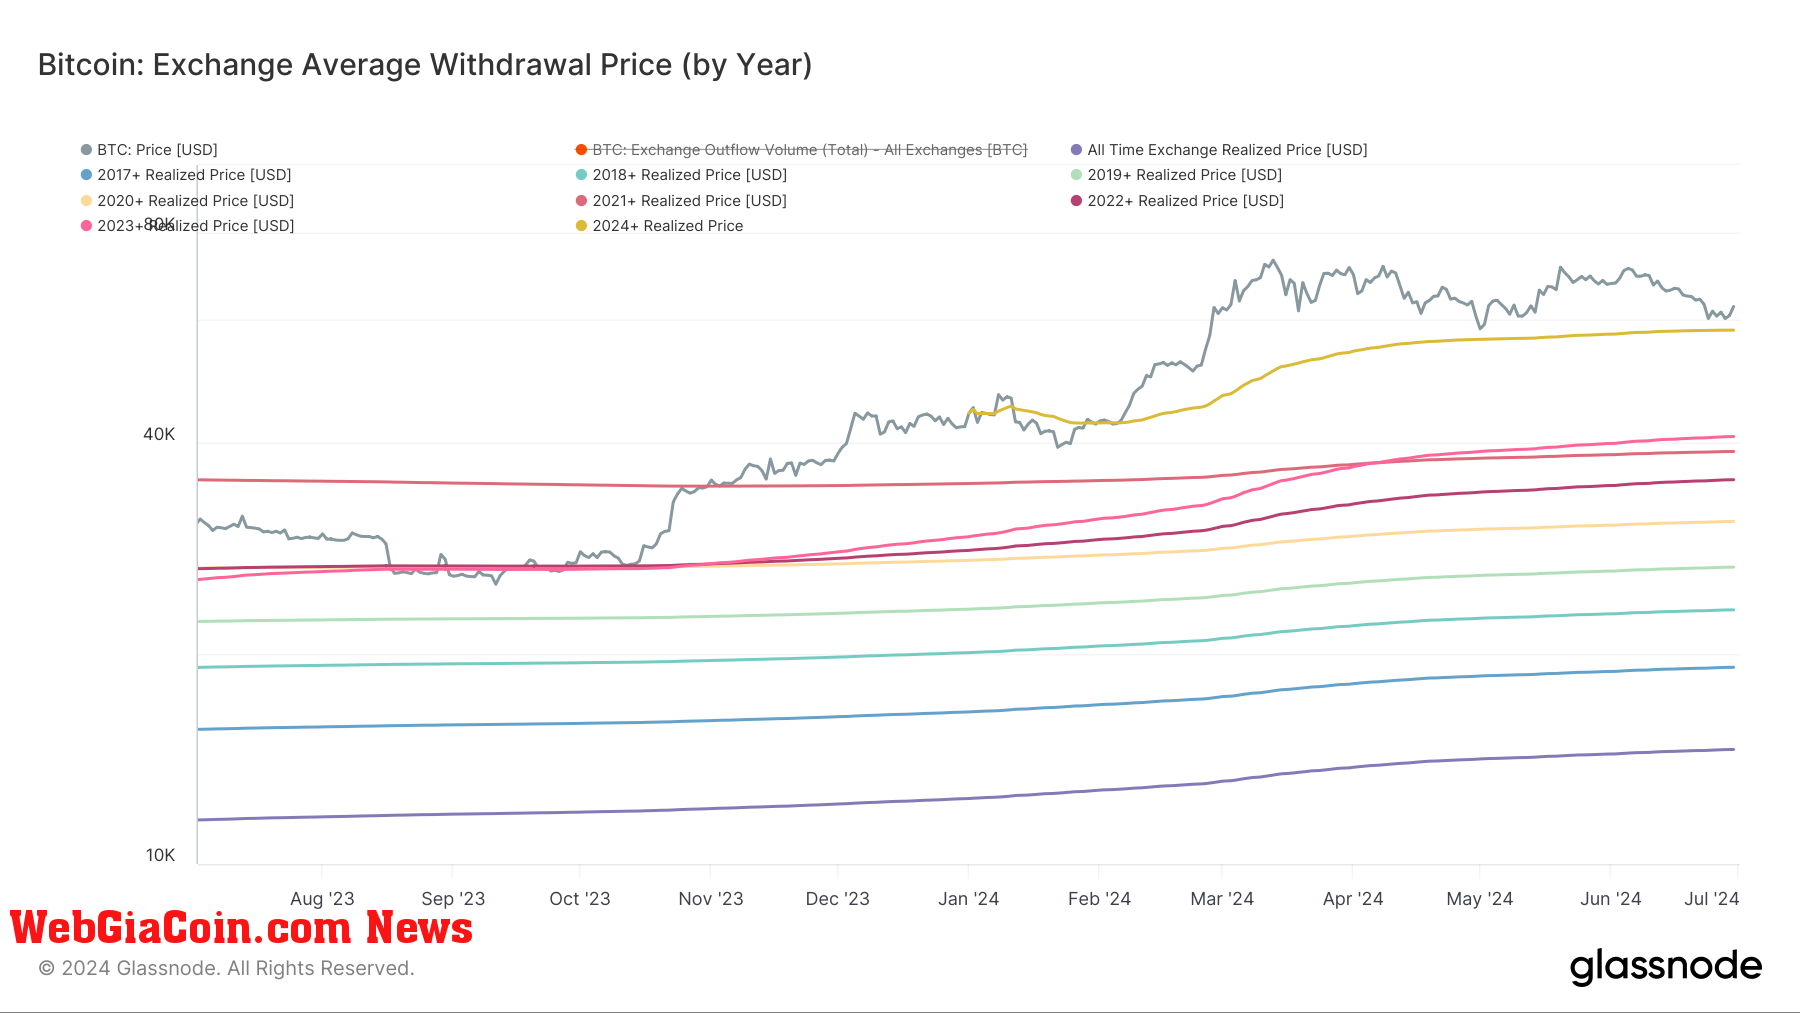 Bitcoin: Exchange Average Withdrawal Price (by year): (Source: Glassnode)